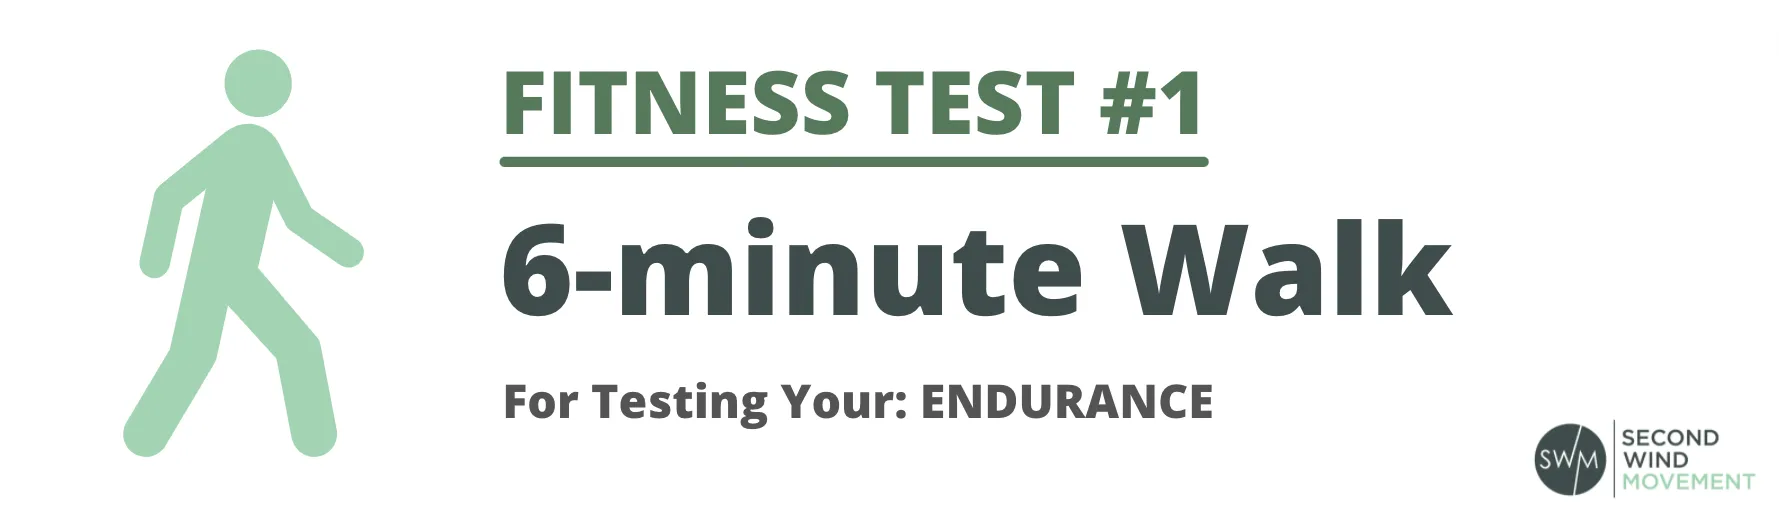 test your fitness level with the 6-minute walk test